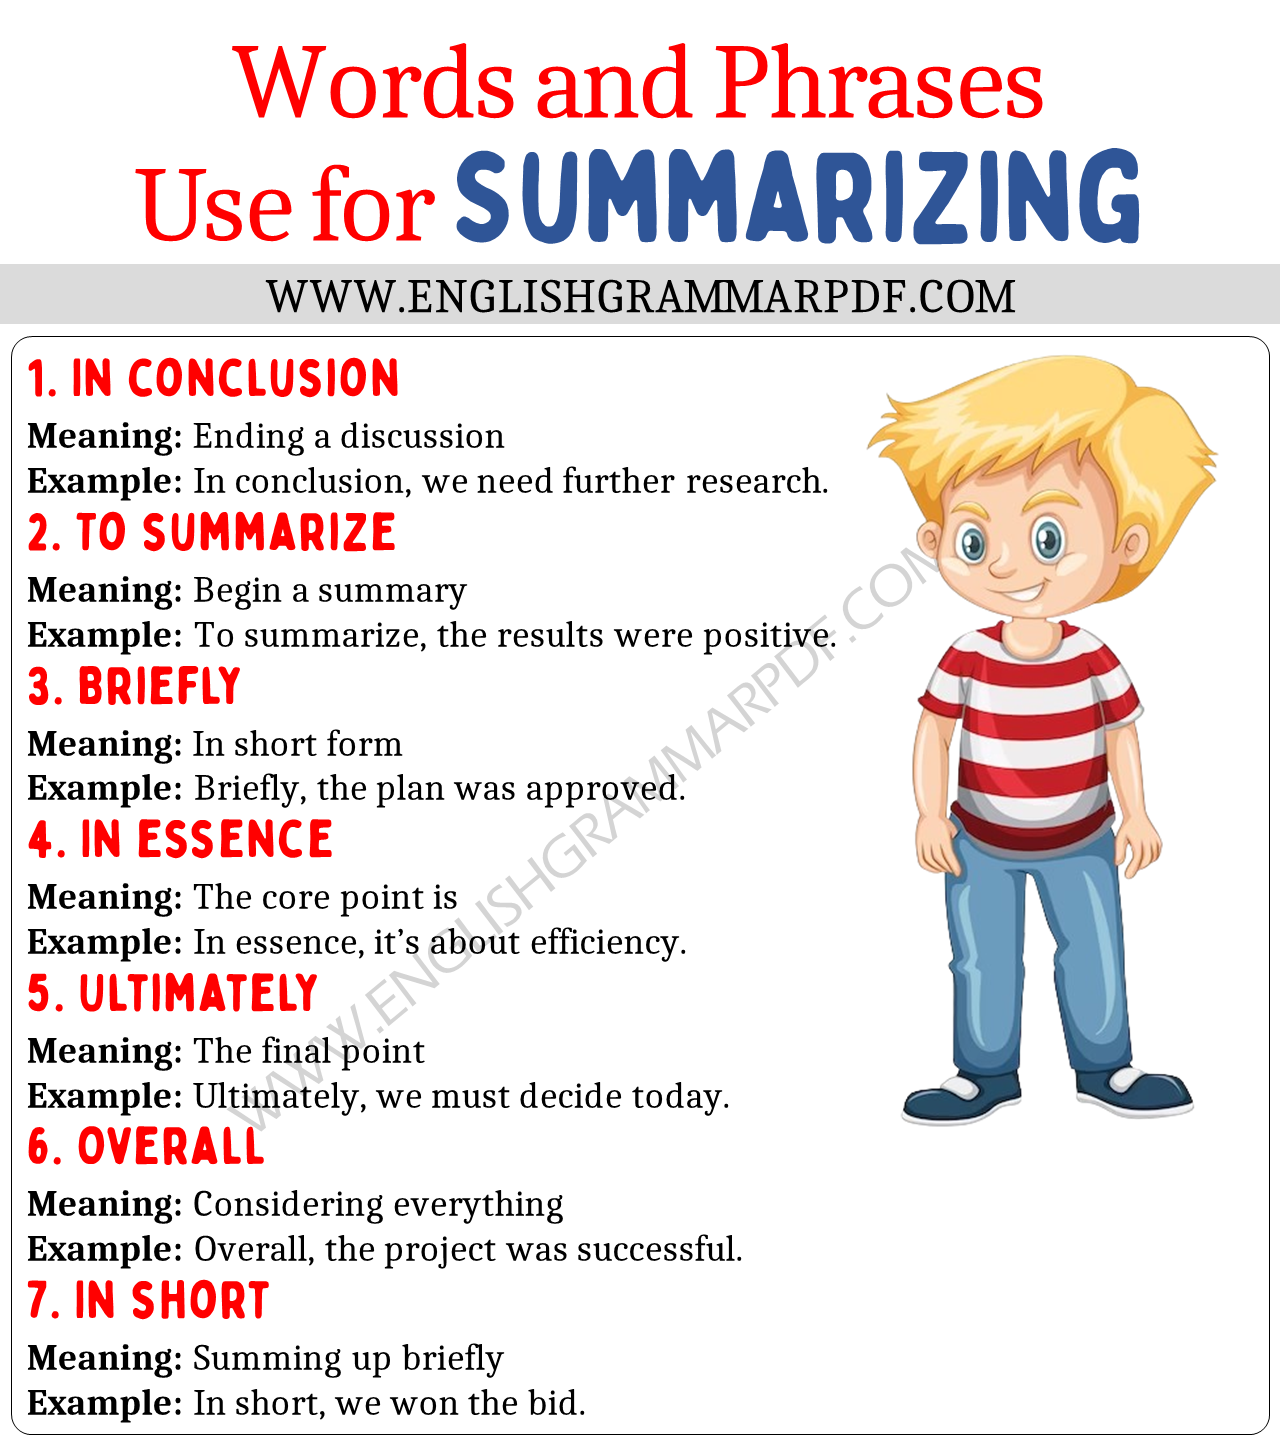 Words and Phrases to Use for Summarizing